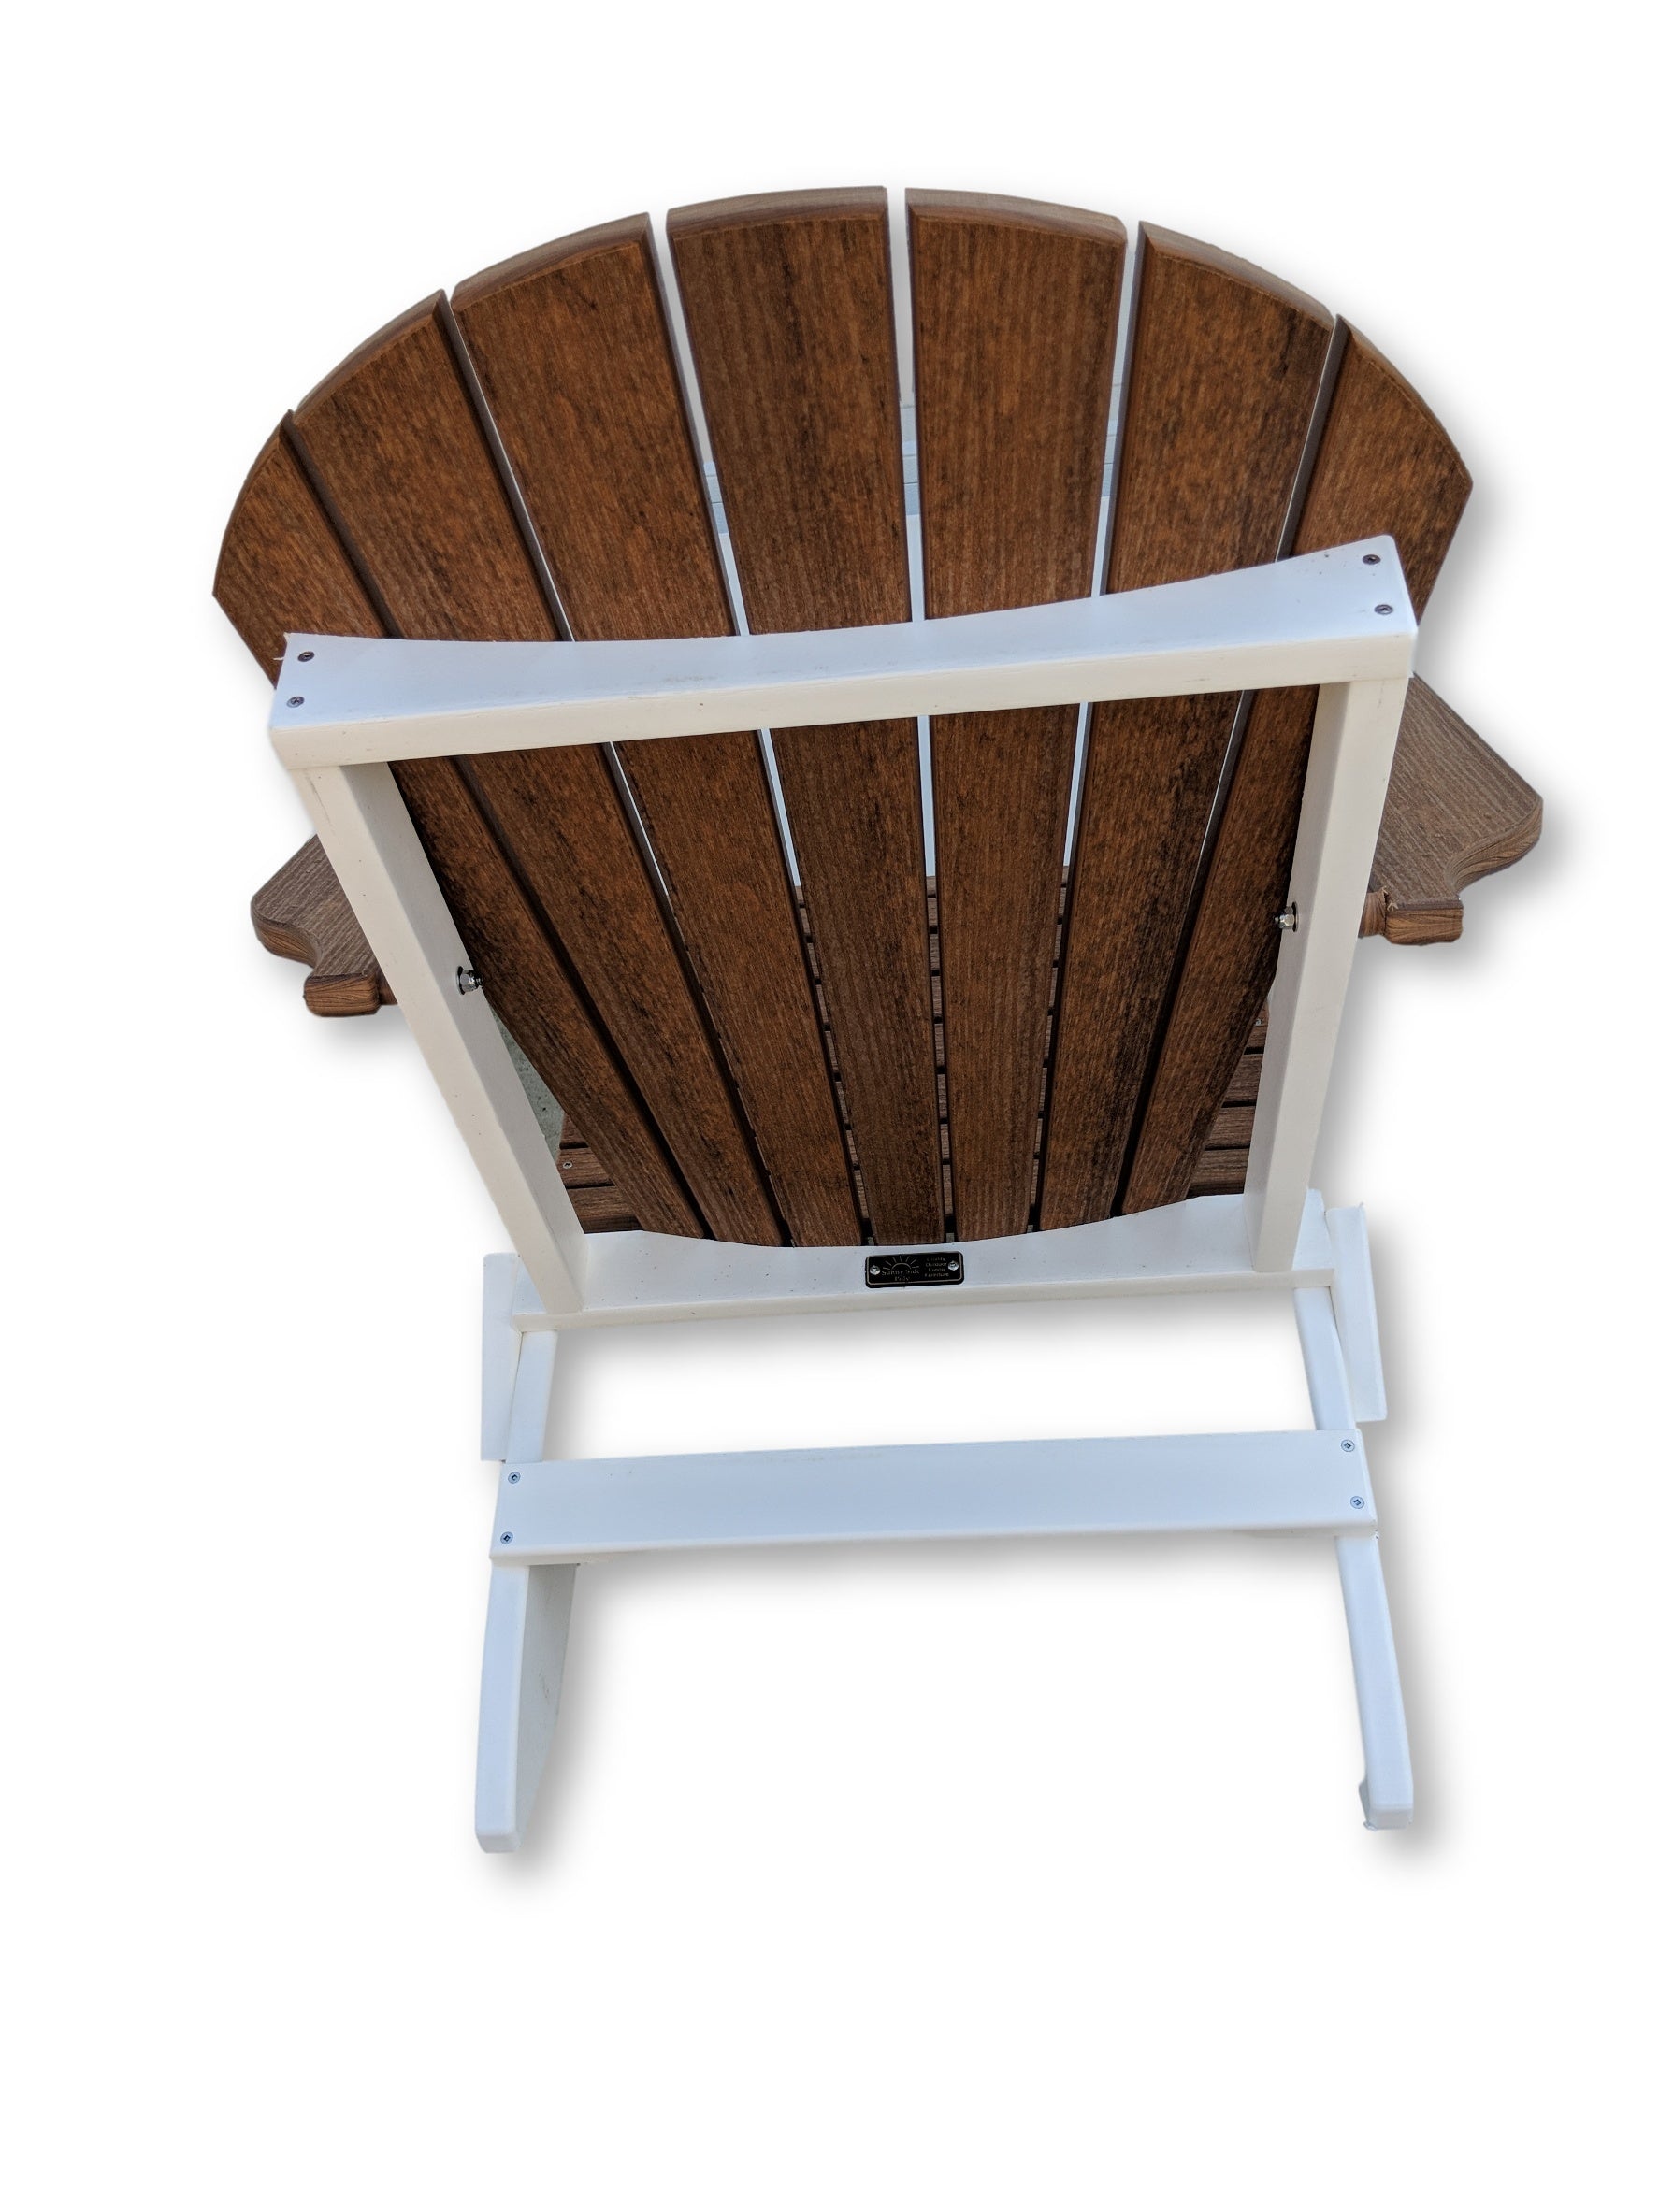 Antique Mahogany White Folding Adirondack Chair With Cup Holders